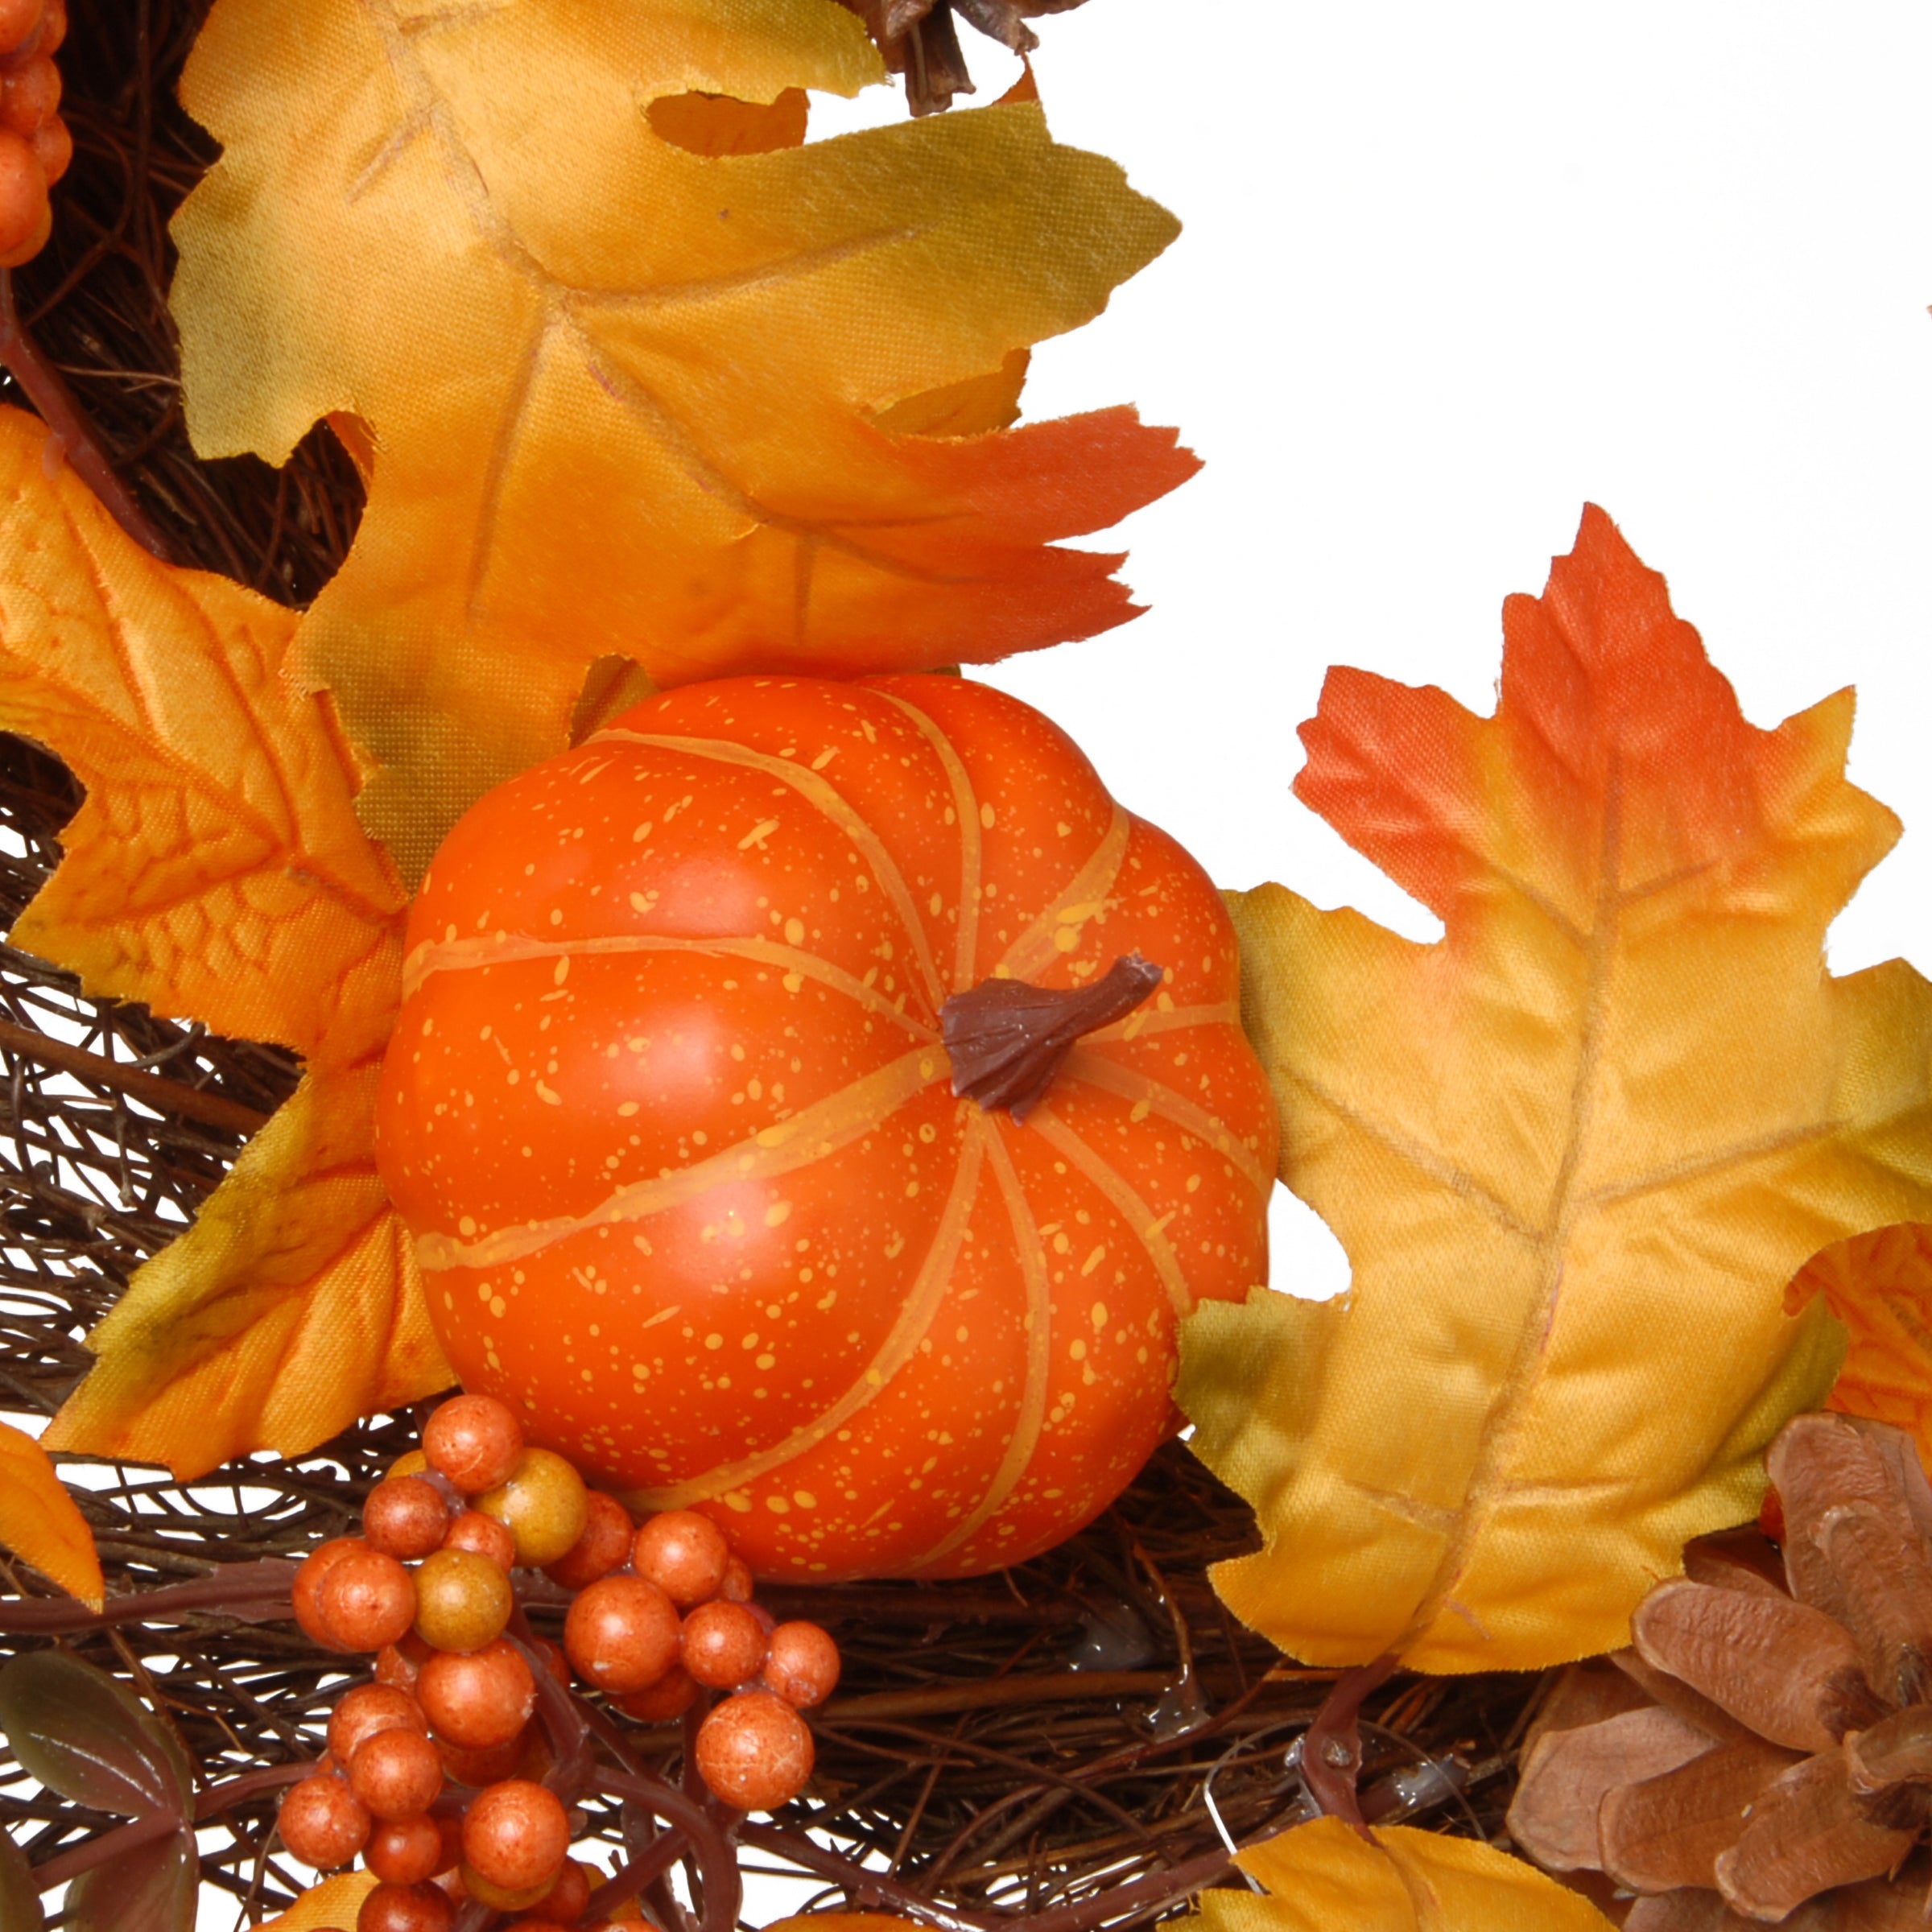 Artificial Autumn Wreath, Decorated with Gourds, Pumpkins, Berry Clusters, Acorns, Maple Leaves, Autumn Collection, 24 in